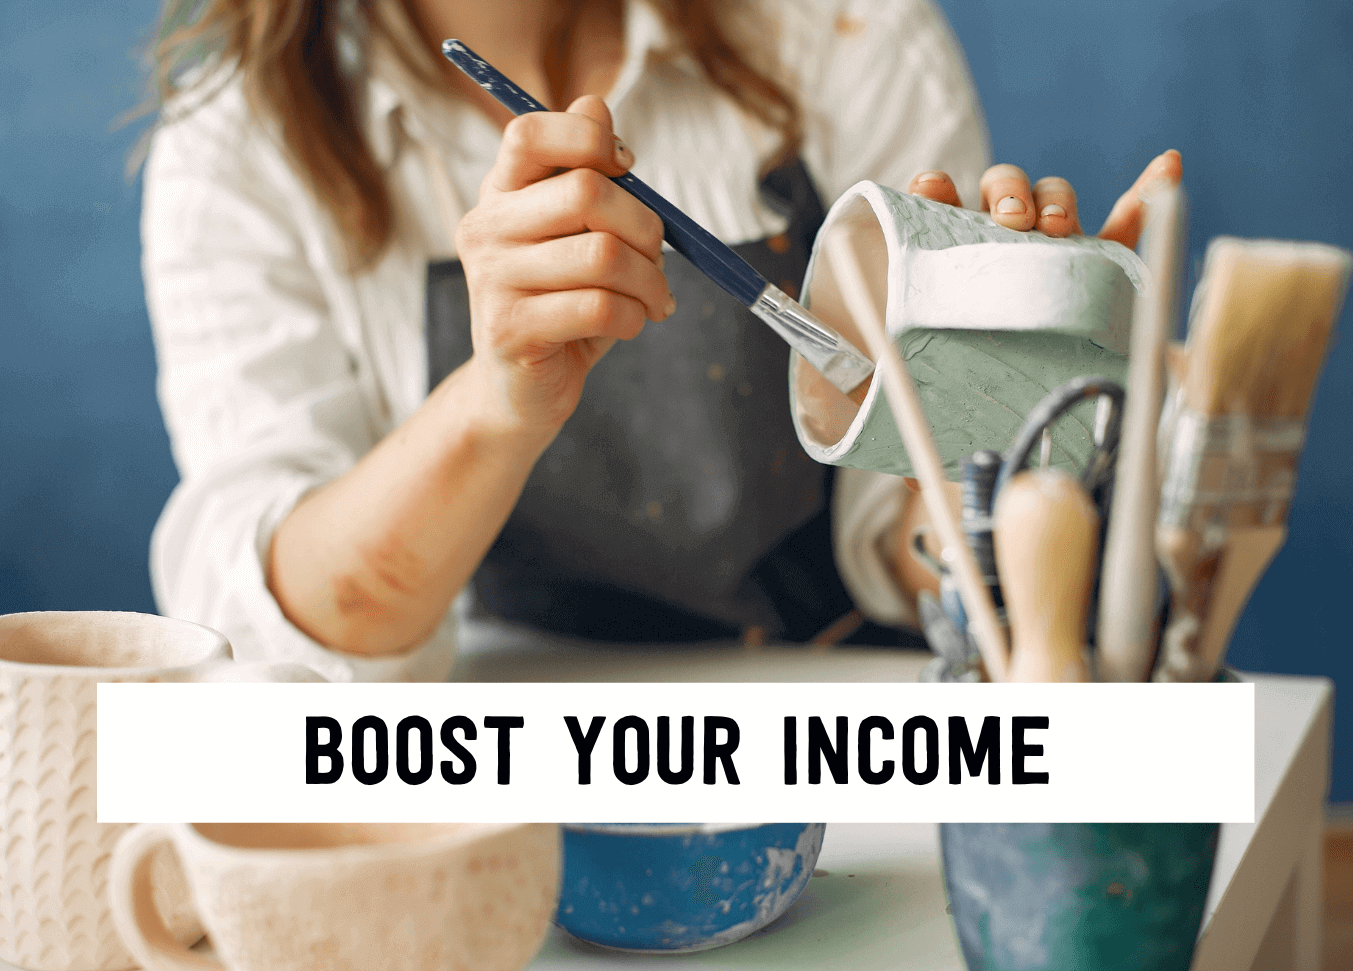 Boost your income | Tizzit.co - start and grow a successful handmade business